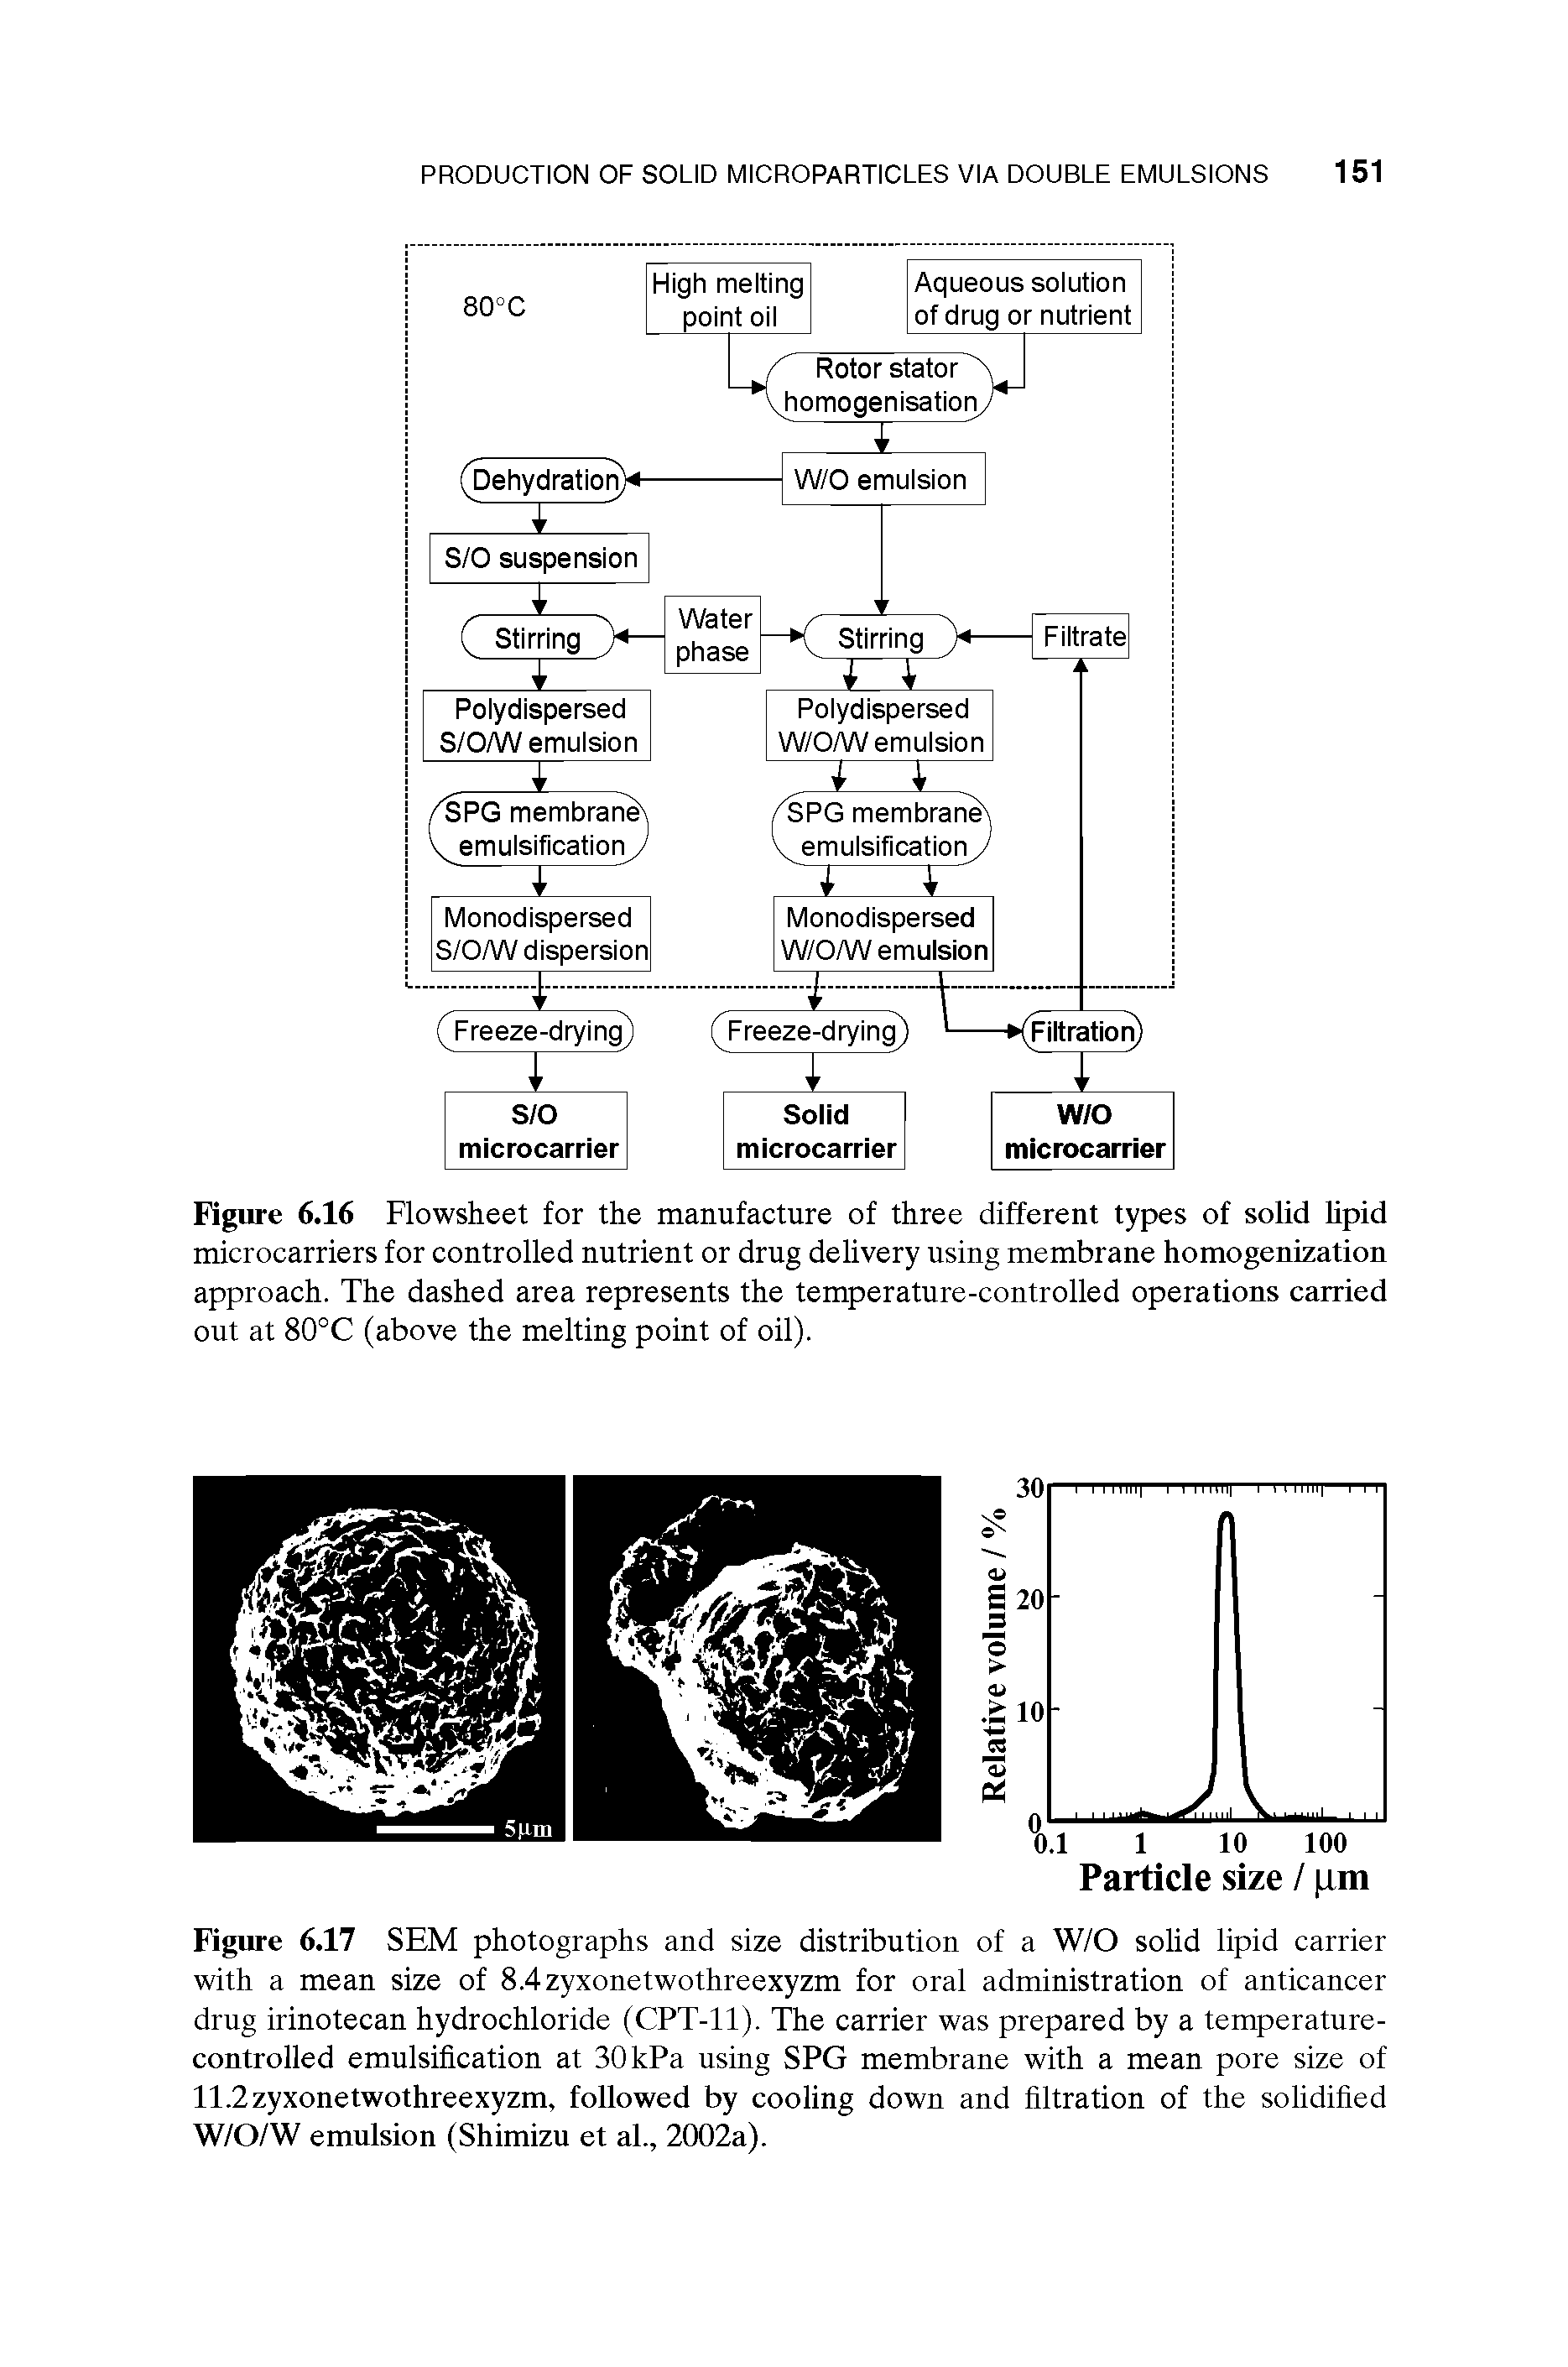 Figure 6.17 SEM photographs and size distribution of a W/O solid lipid carrier with a mean size of 8.4zyxonetwothreexyzm for oral administration of anticancer drng irinotecan hydrochloride (CPT-11). The carrier was prepared by a temperature-controlled emulsification at 30kPa using SPG membrane with a mean pore size of 11.2zyxonetwothreexyzm, followed by cooling down and filtration of the solidified W/O/W emulsion (Shimizu et al., 2002a).